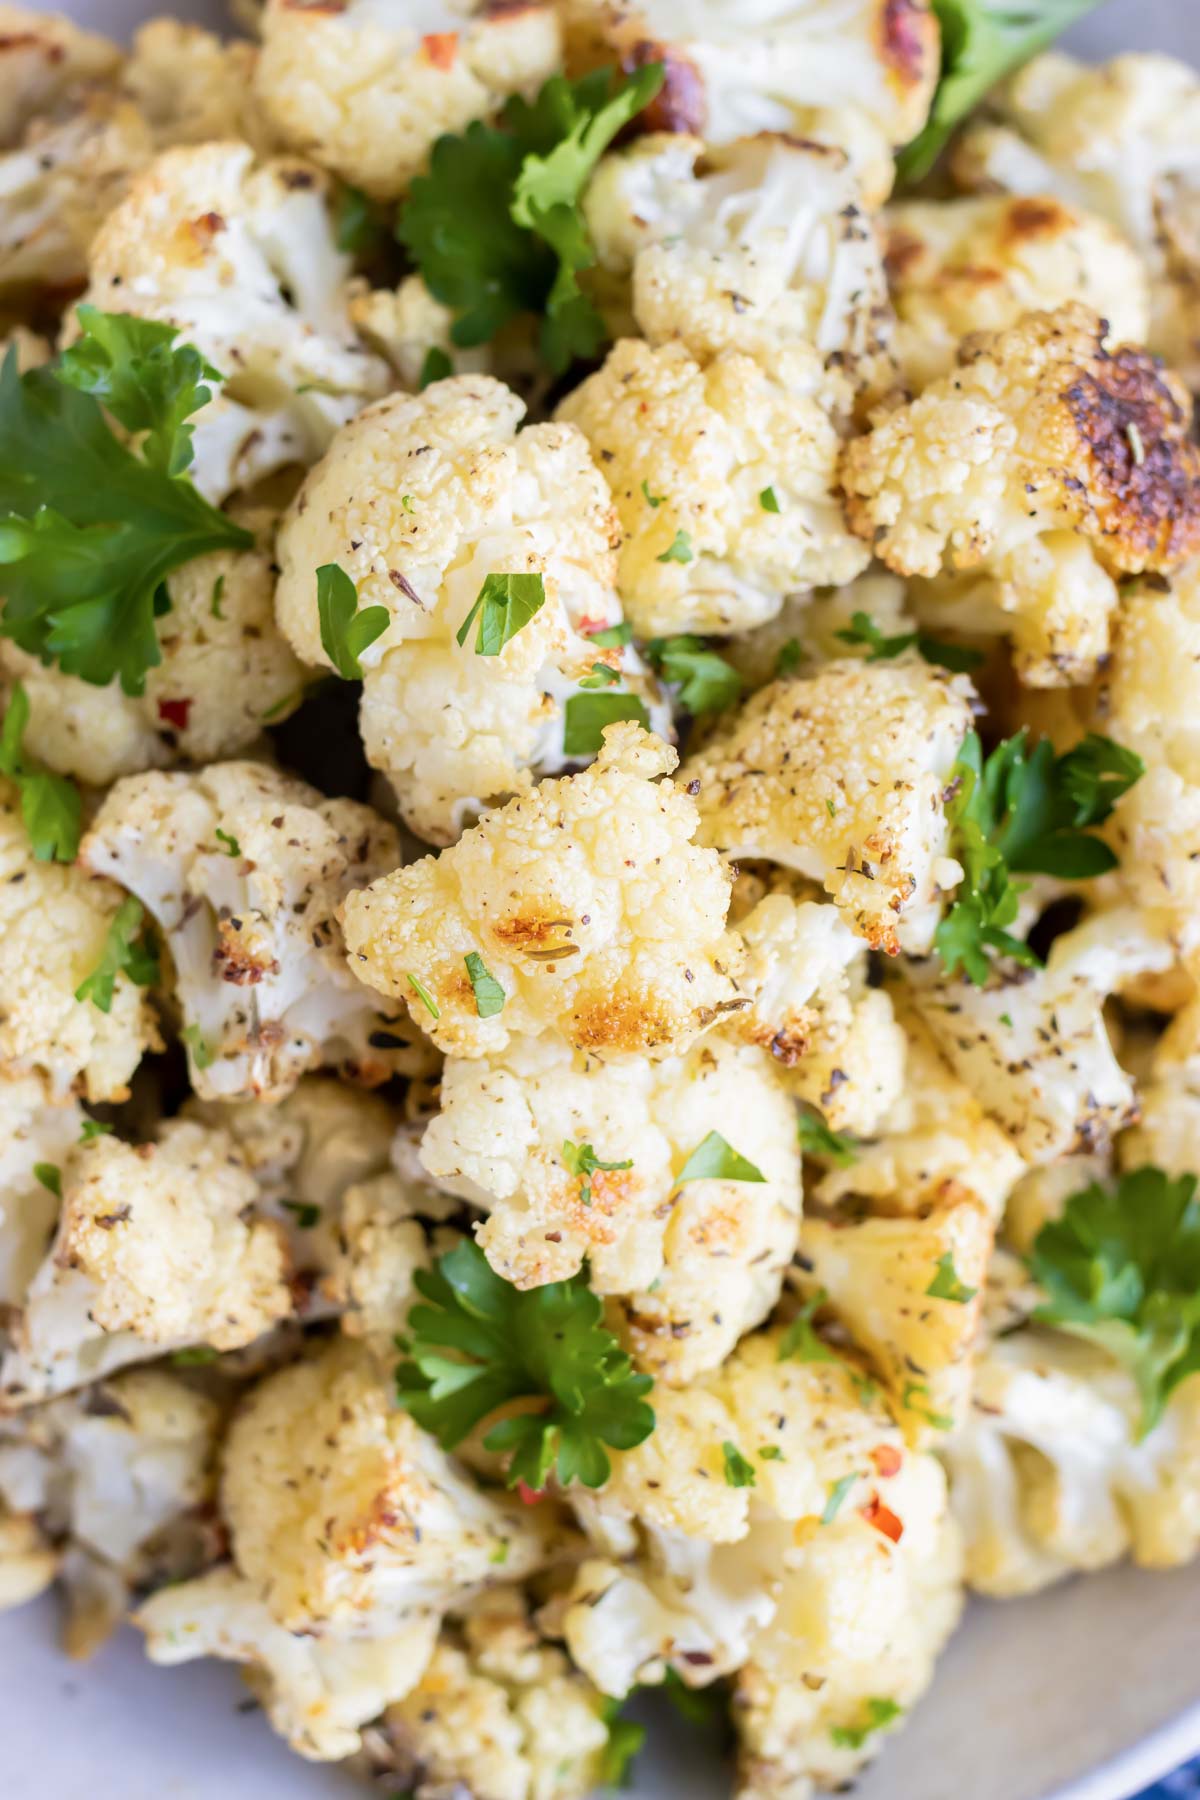 Roasted cauliflower with crispy golden edges and a tender center.